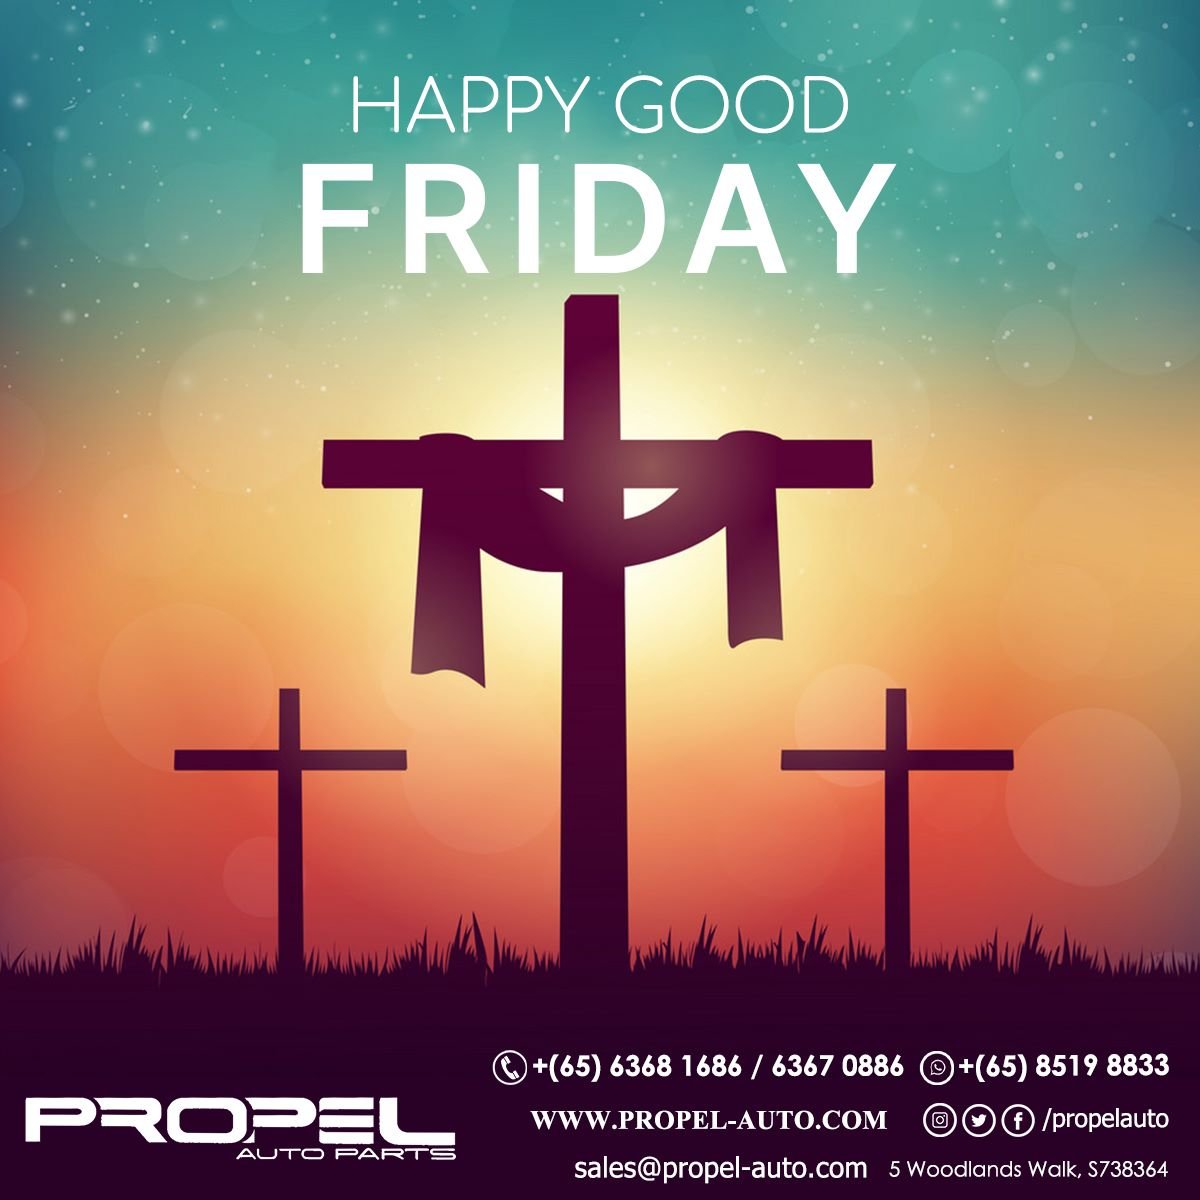 #PropelAutoParts would like to take this opportunity to wish everyone a blessed Good Friday! 

#HappyEaster #GoodFriday #SG #easterlongweekend #staysafe #fridaygood #fridayfeelinggood